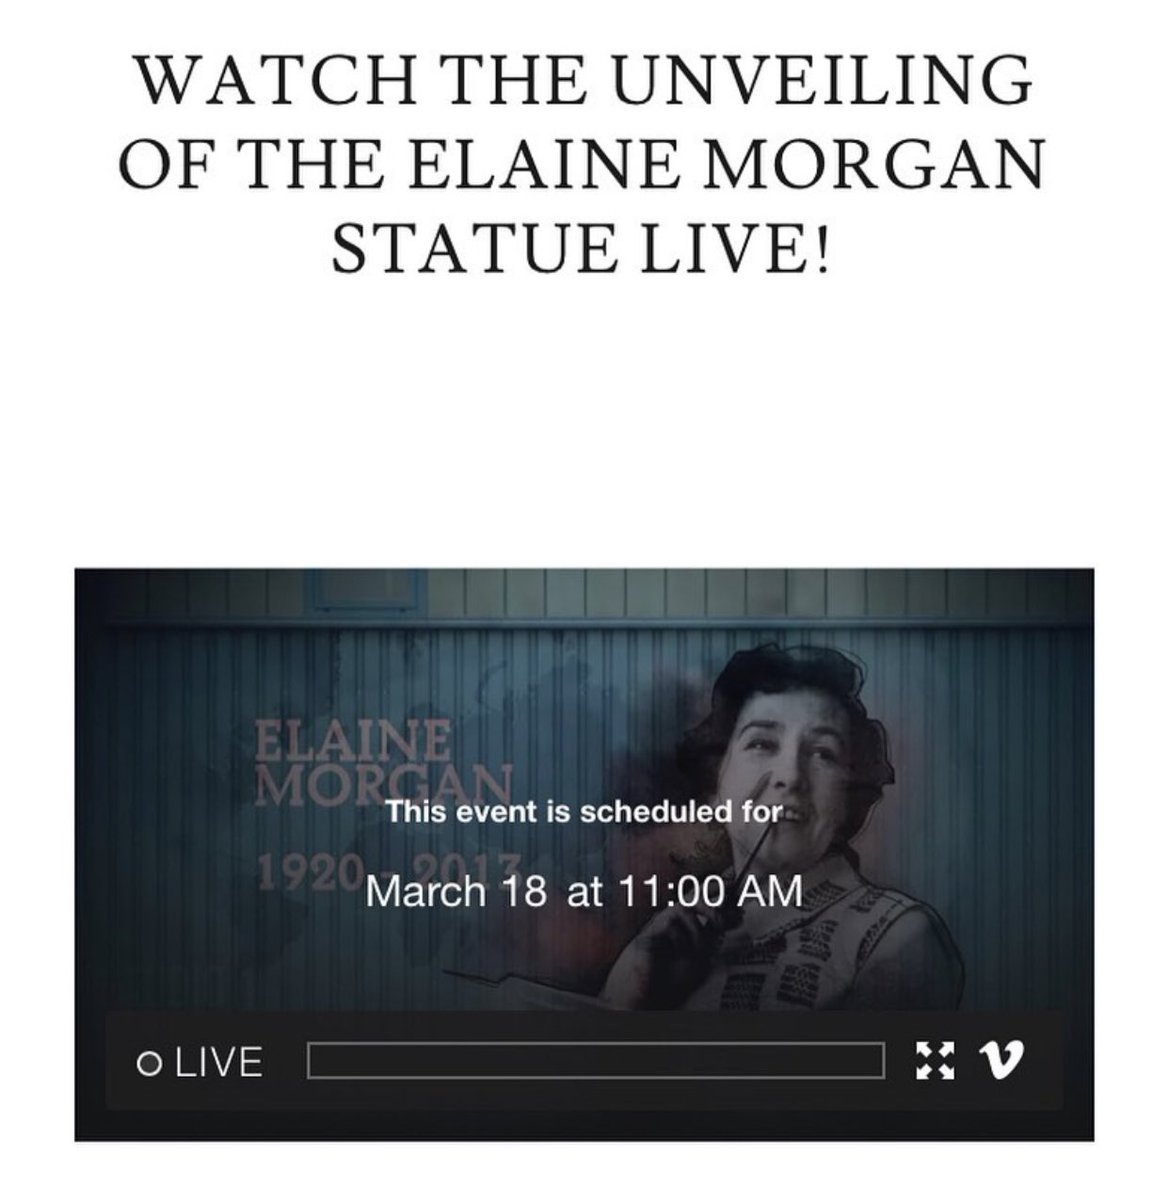 Tomorrow is the day - the unveiling of the statue of #ElaineMorgan in Mountain Ash. If you can’t join us you can watch it live on our website at 11am: monumentalwelshwomen.com
#MonumentalWelshWomen
#ElaineMorganStatue 
#5Women5Statues5Years
#MakingHerstory